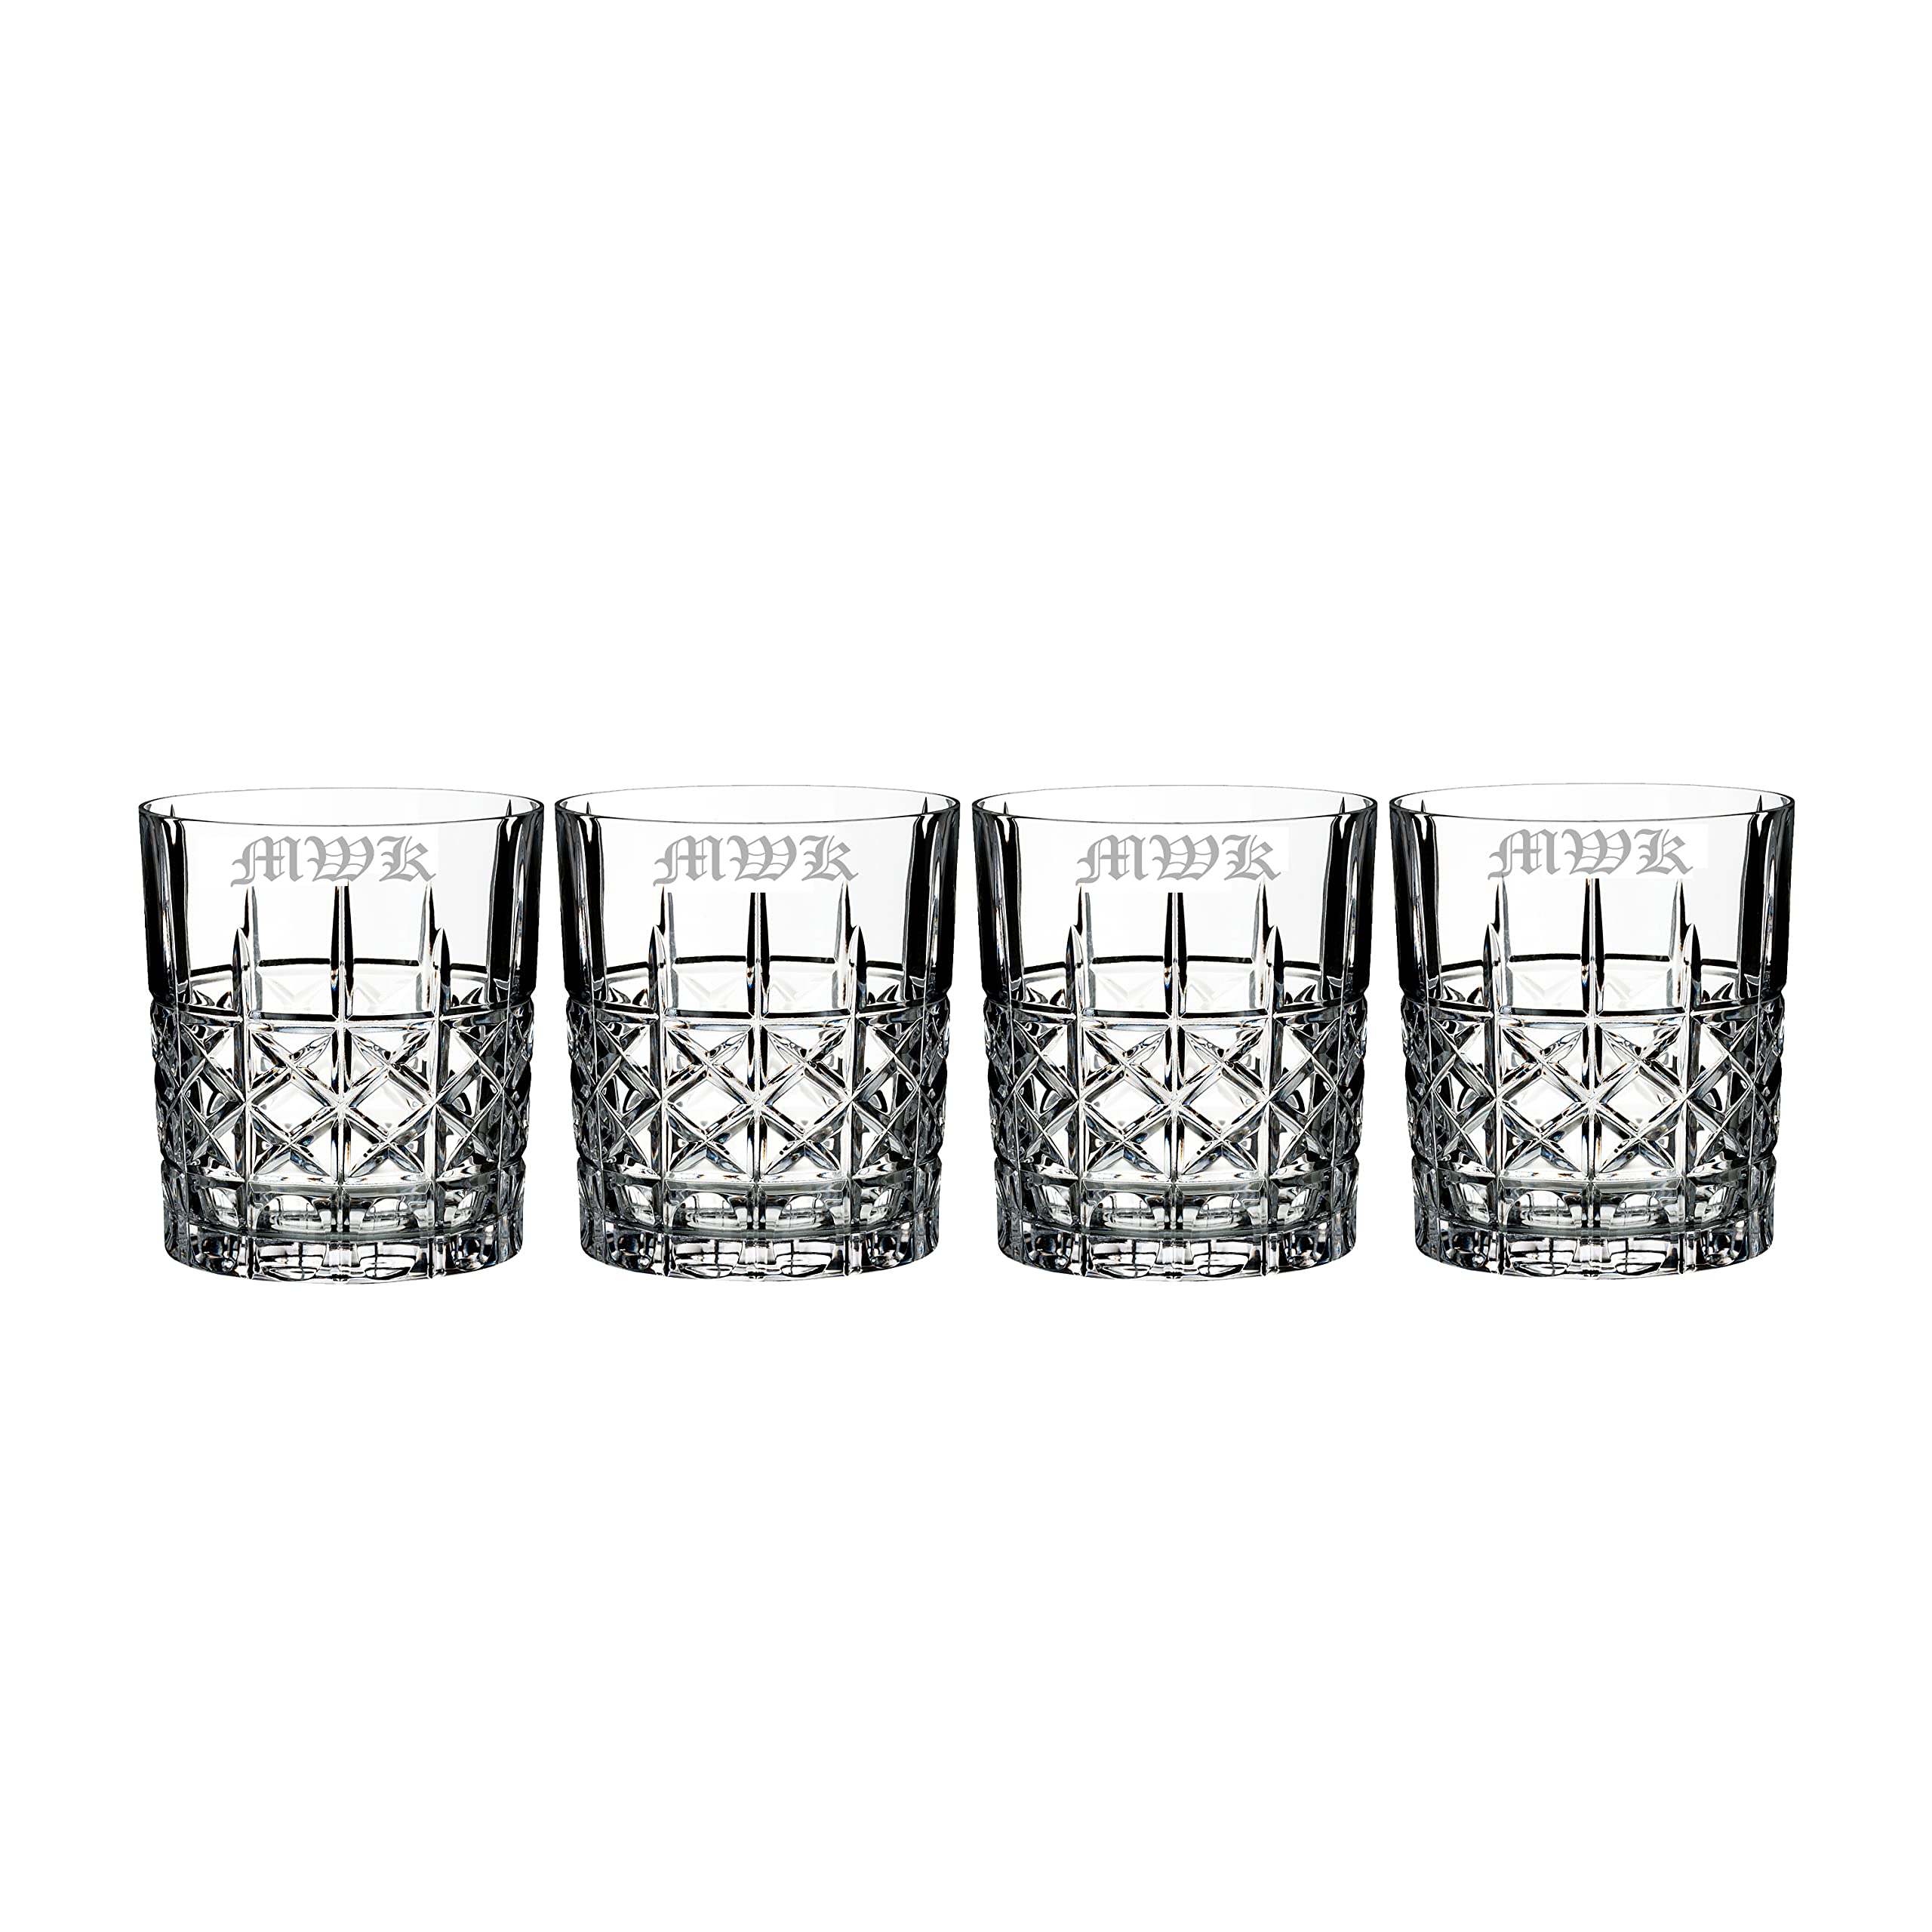 Waterford Marquis Personalized Brady Double Old Fashioned 11oz Whiskey Glasses, Set of Four Custom Engraved Crystal Rocks Glasses for Bourbon, Scotch, Liquor, and More